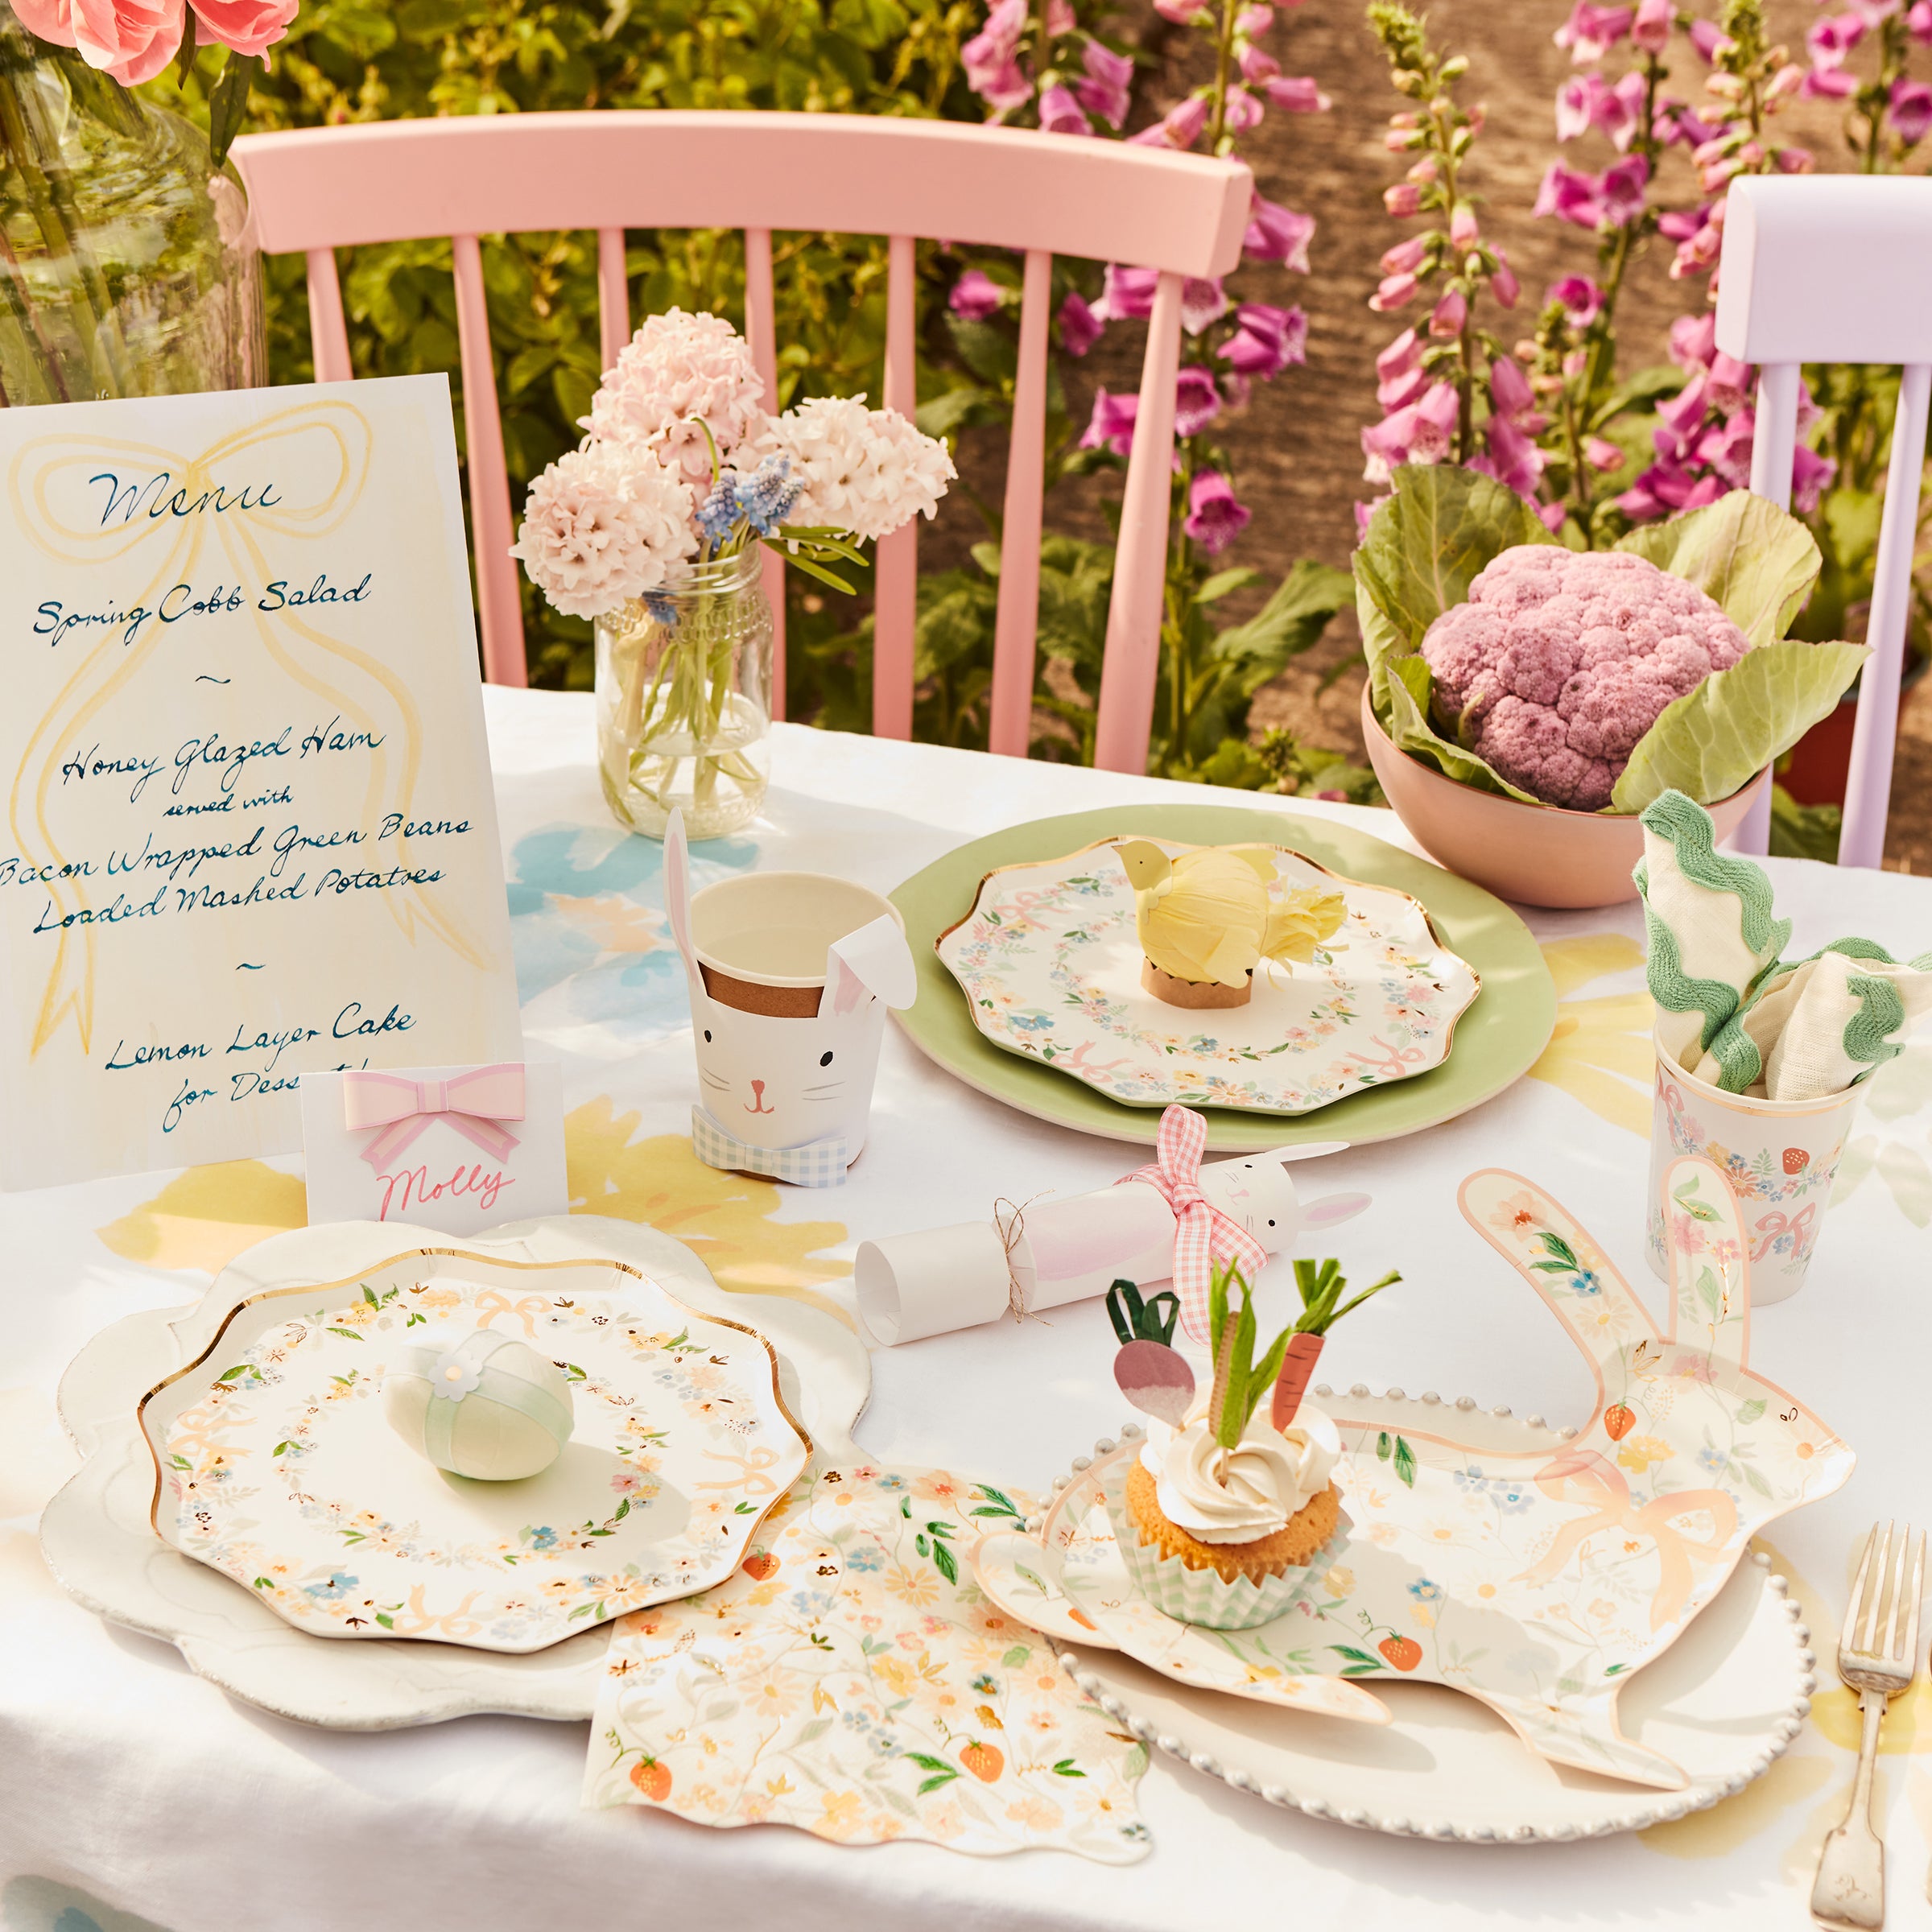 These elegant bunny plates are perfect as Easter plates, or for a garden party.